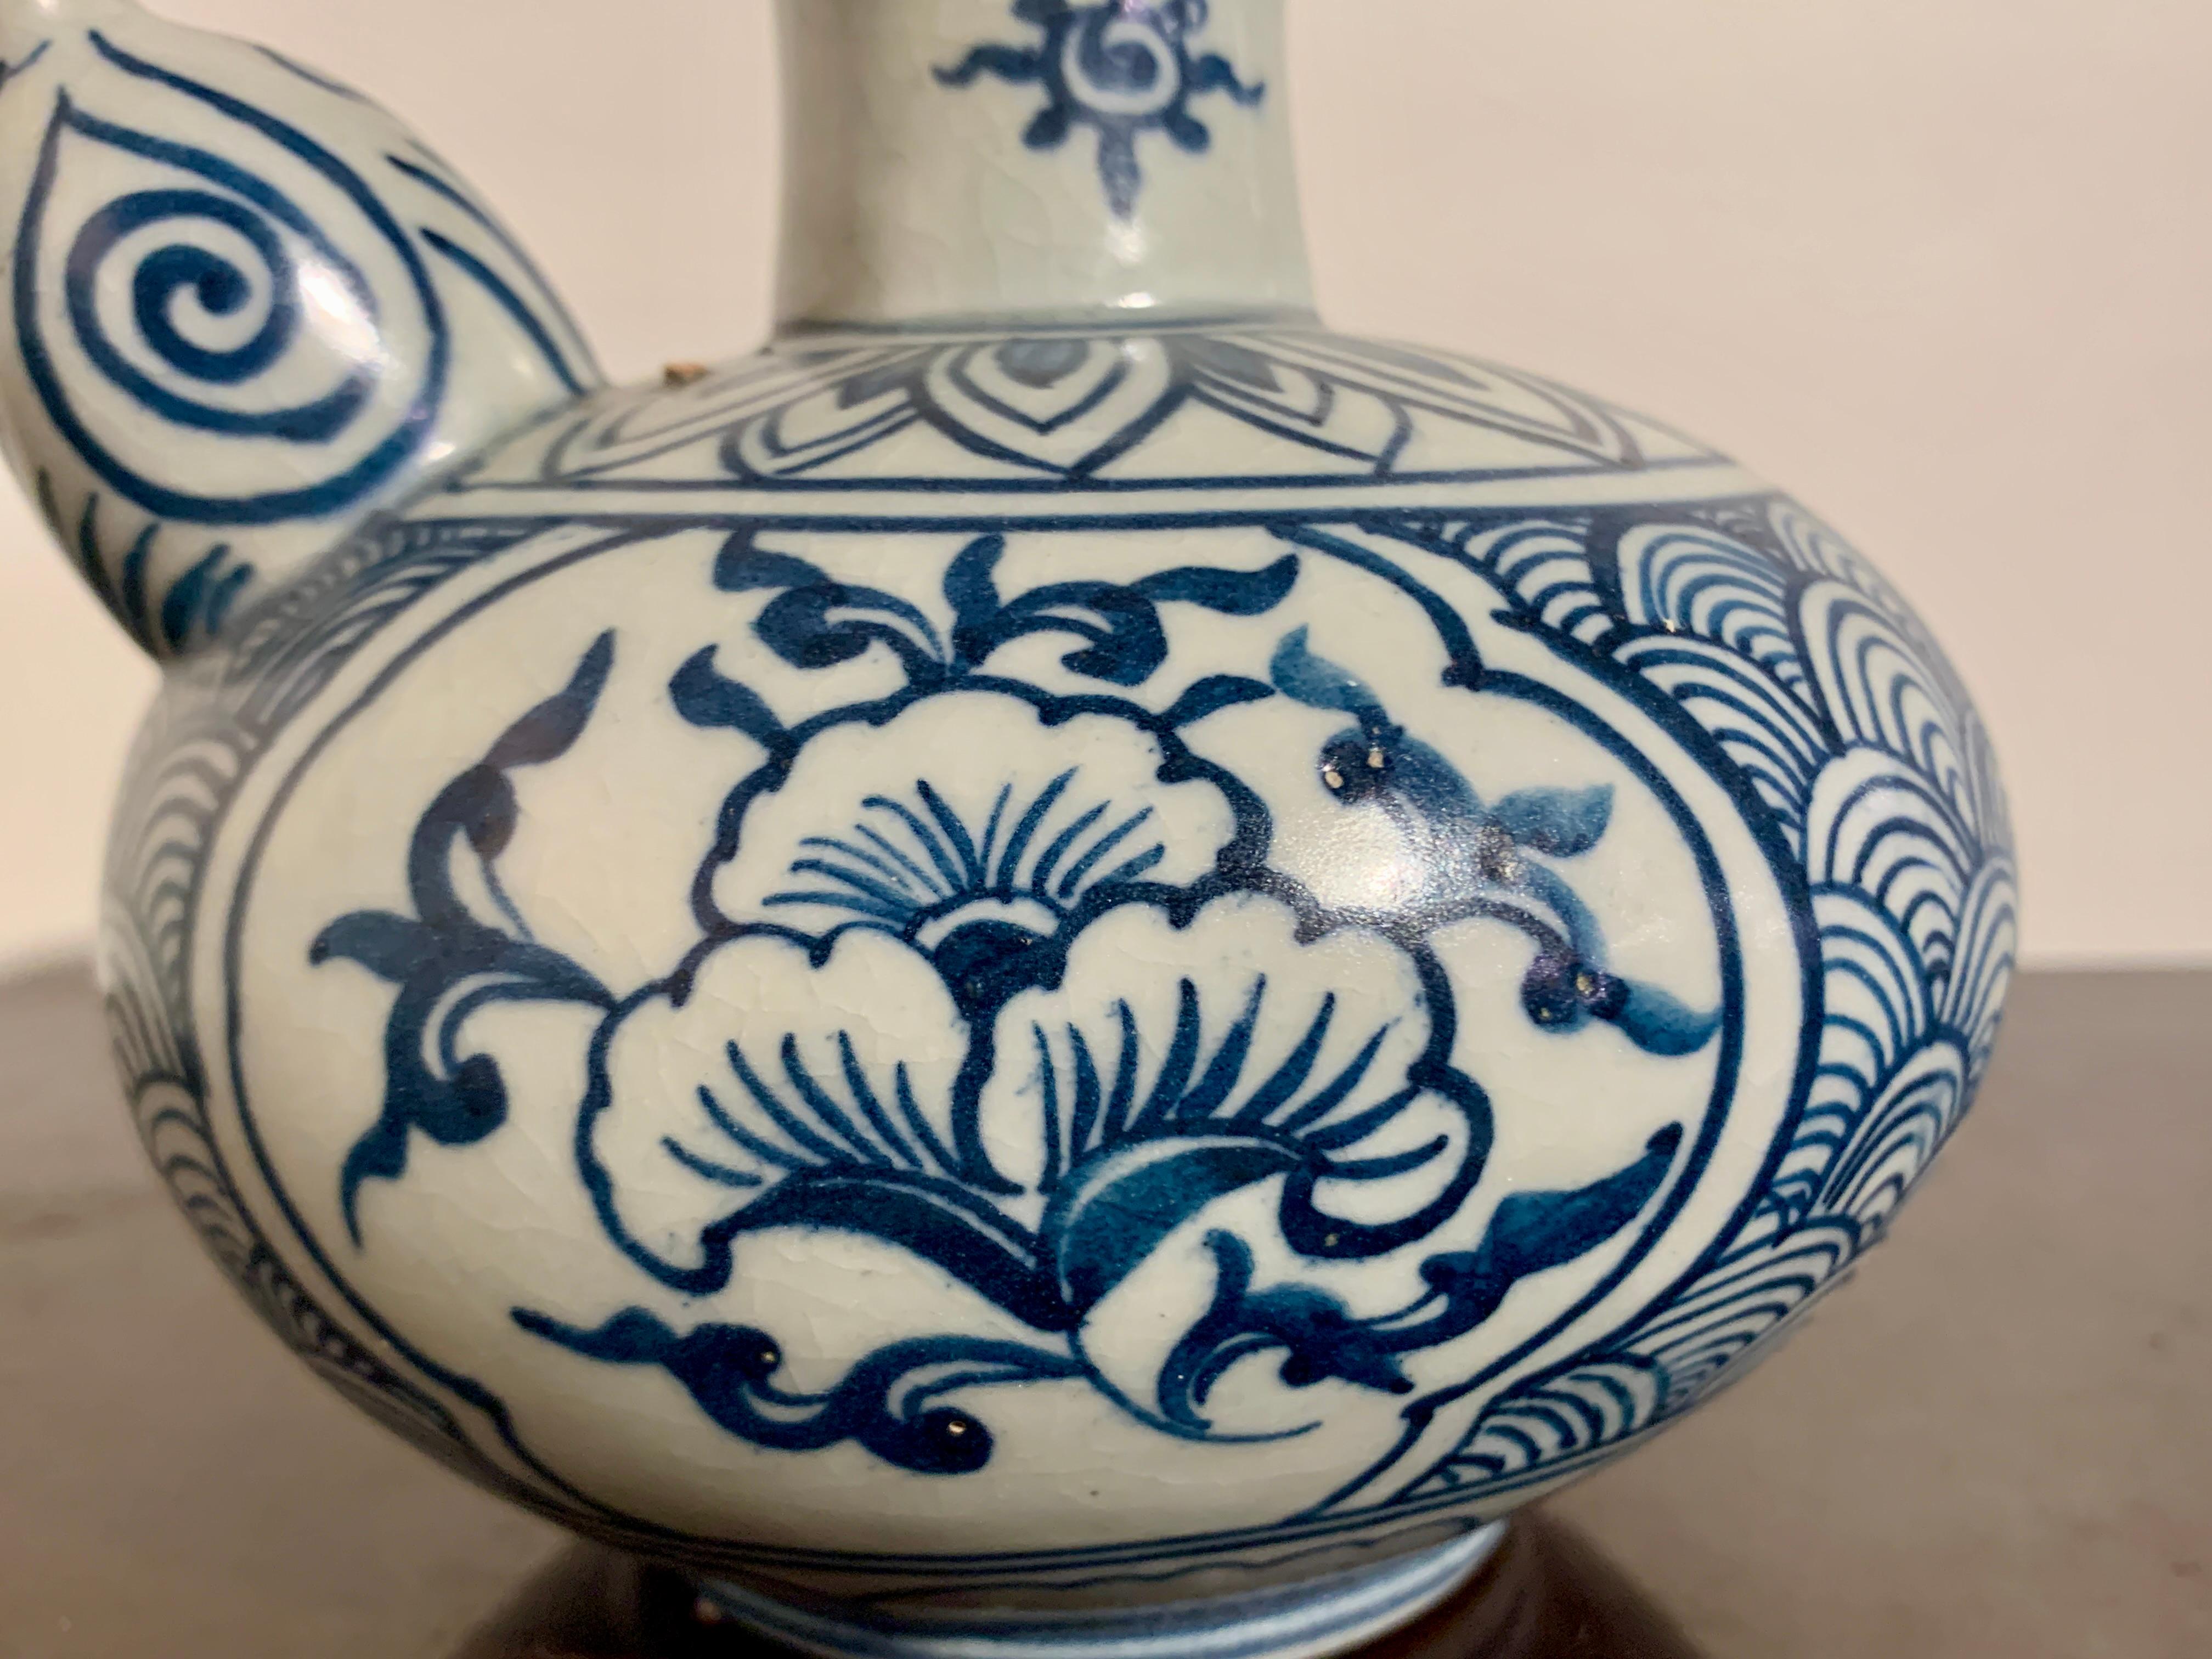 18th Century and Earlier Small Vietnamese Kendi with Blue and White Design, 15th-16th Century, Vietnam